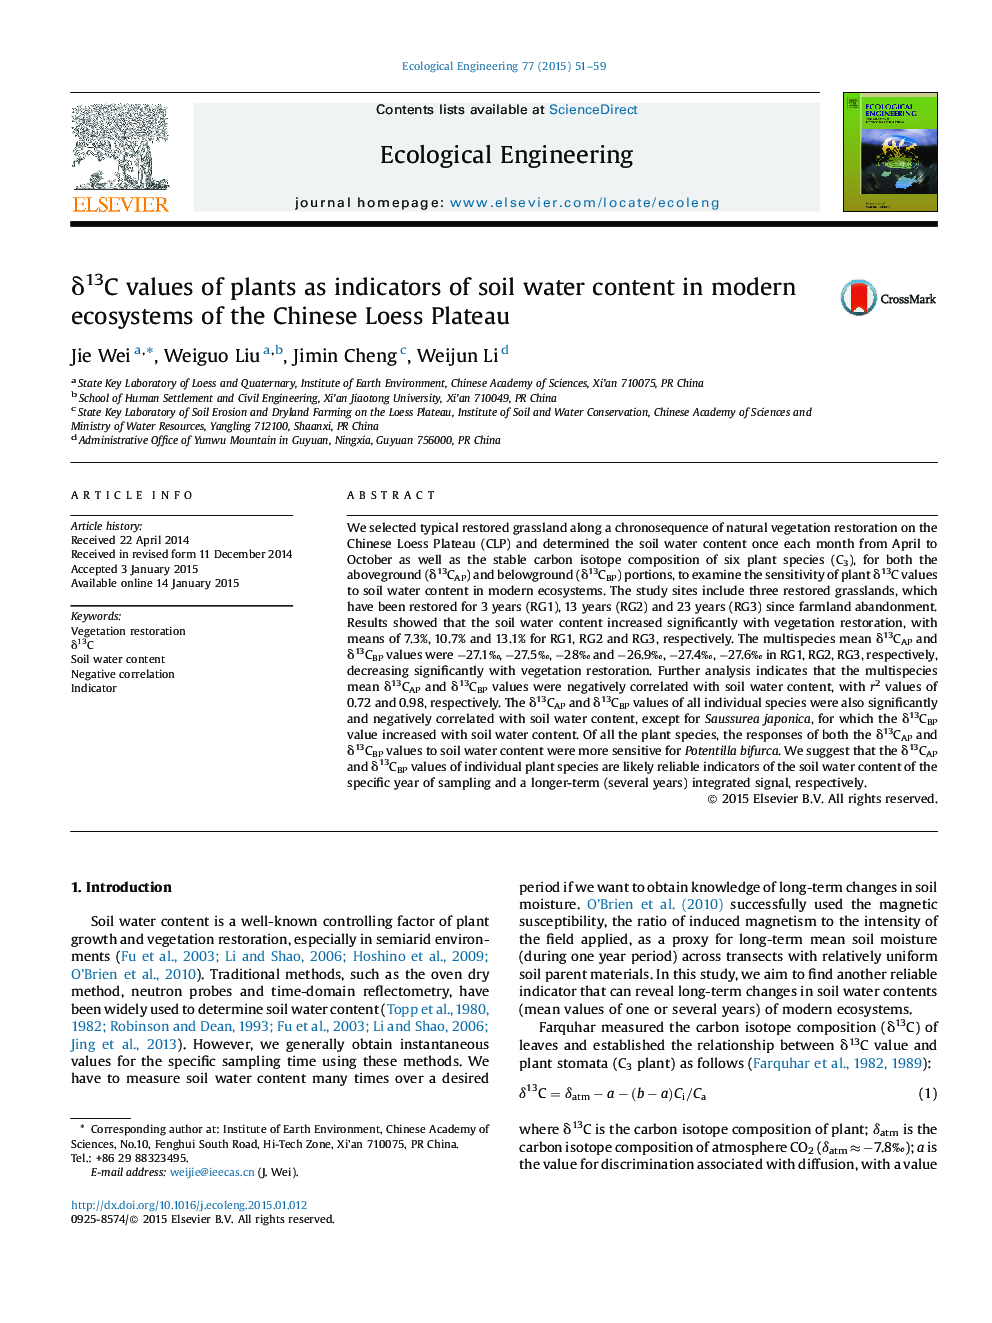 Î´13C values of plants as indicators of soil water content in modern ecosystems of the Chinese Loess Plateau